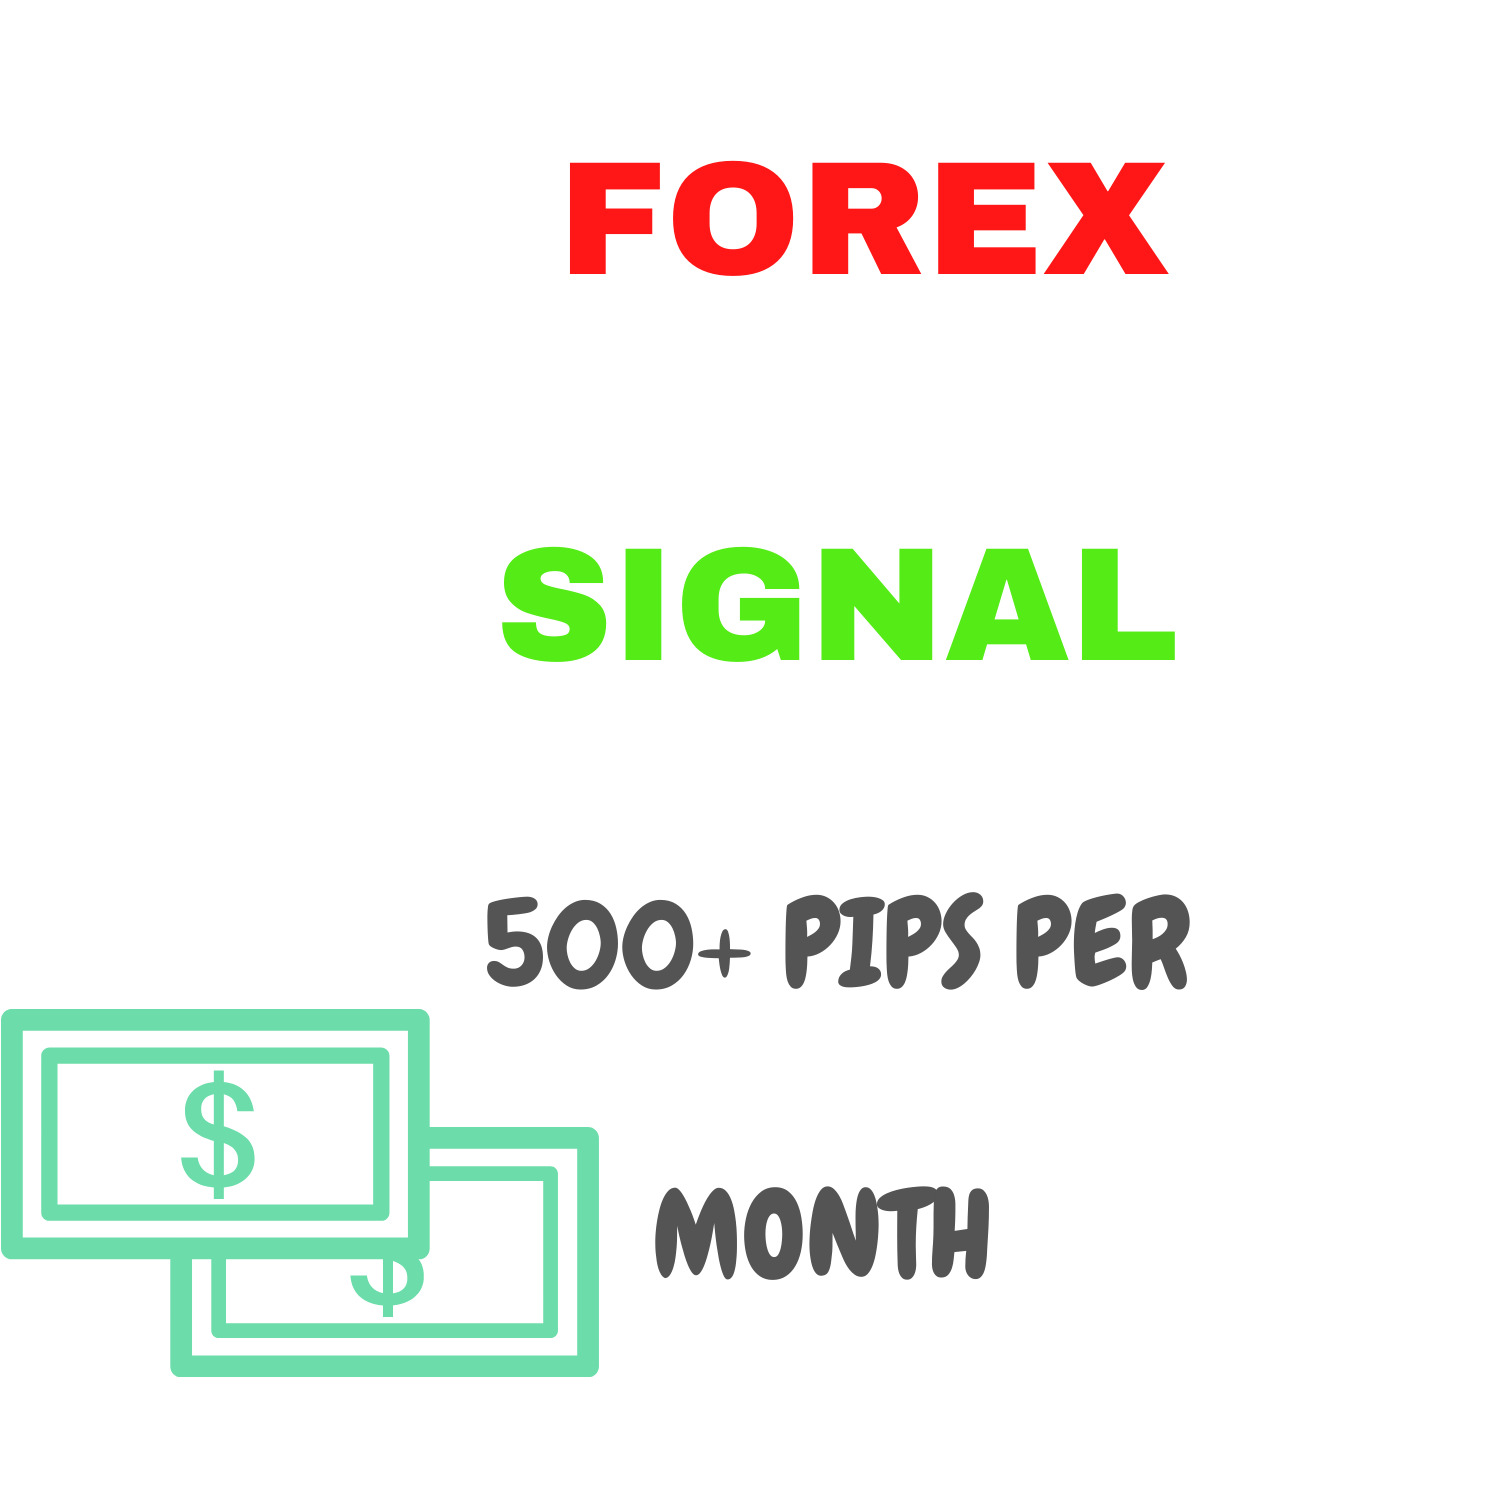 Forex System Accurate VIP Lifetime Signals Monthly Minimum Guaranteed 500+Pips